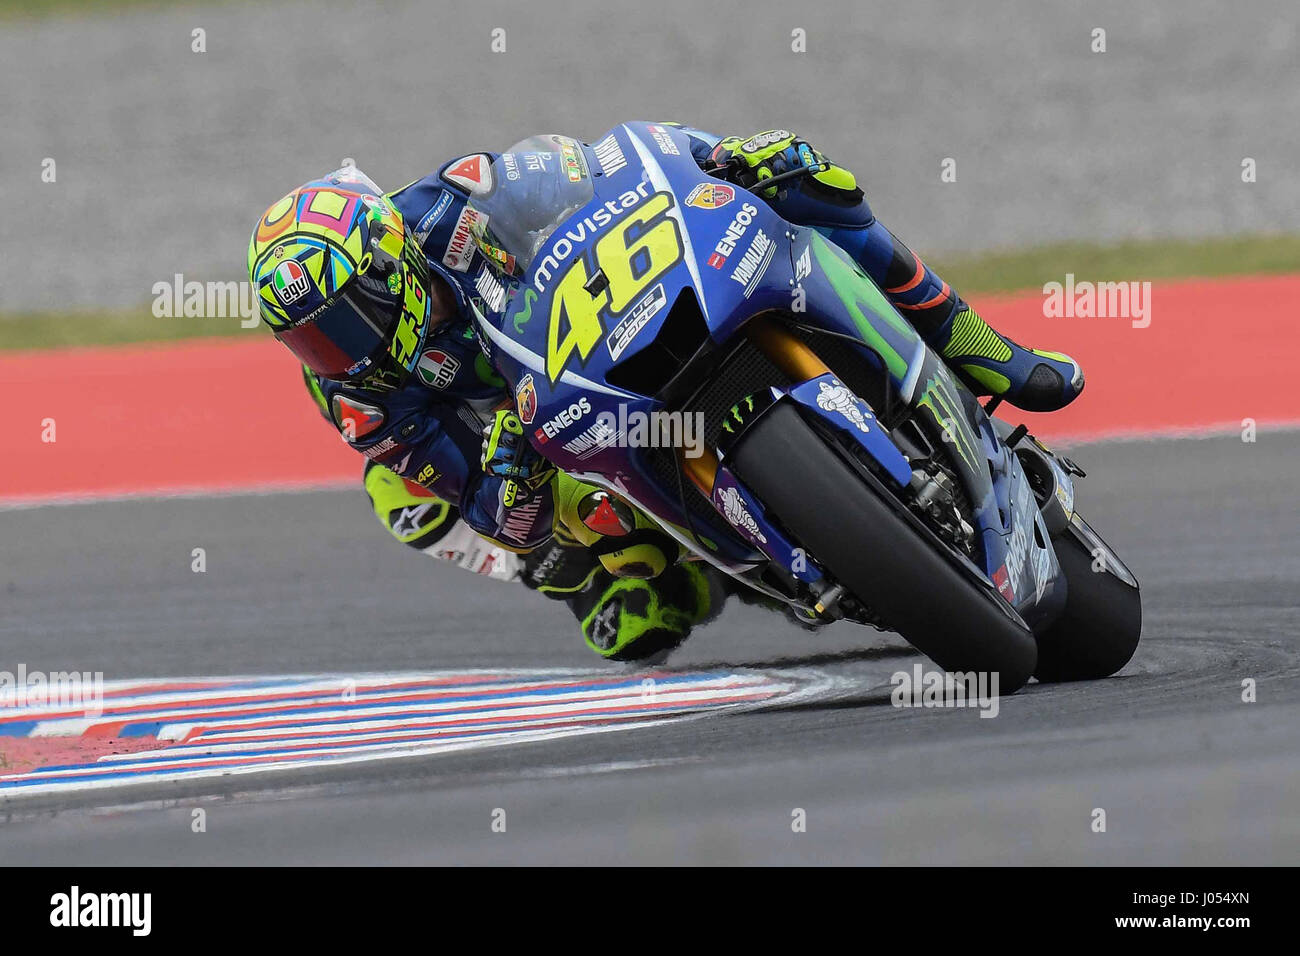 RIO HONDO-APRIL 9, Valentino Rossi of Italy and Movistar Yamaha MotoGP in action during the MotoGp Race of Argentina - Race on April 9, 2017 in Rio Hondo, Argentina.  (Photo by Marco Iorio) Stock Photo